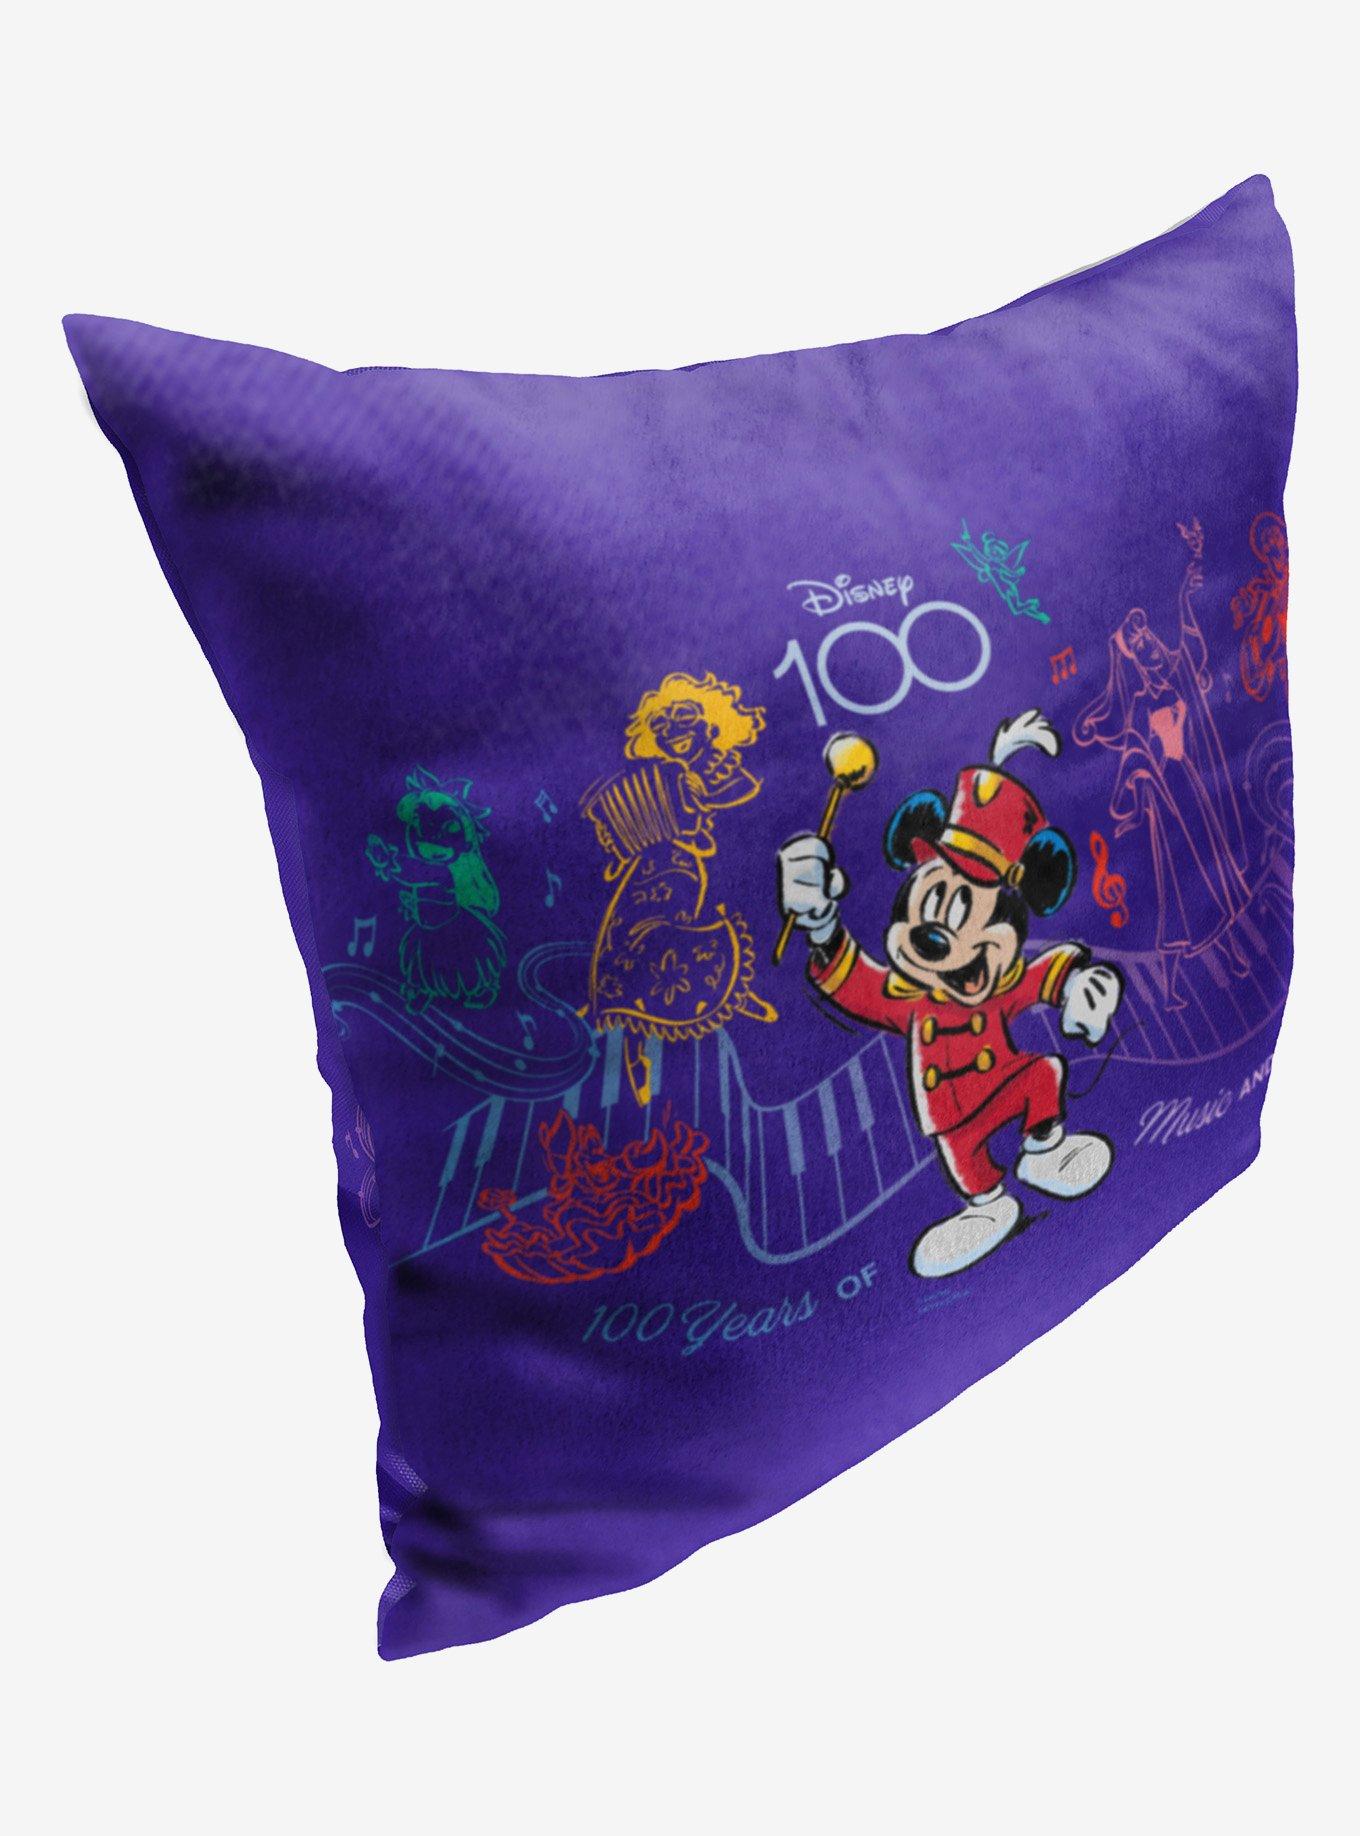 Disney100 Mickey Mouse Music And Wonder Printed Throw Pillow